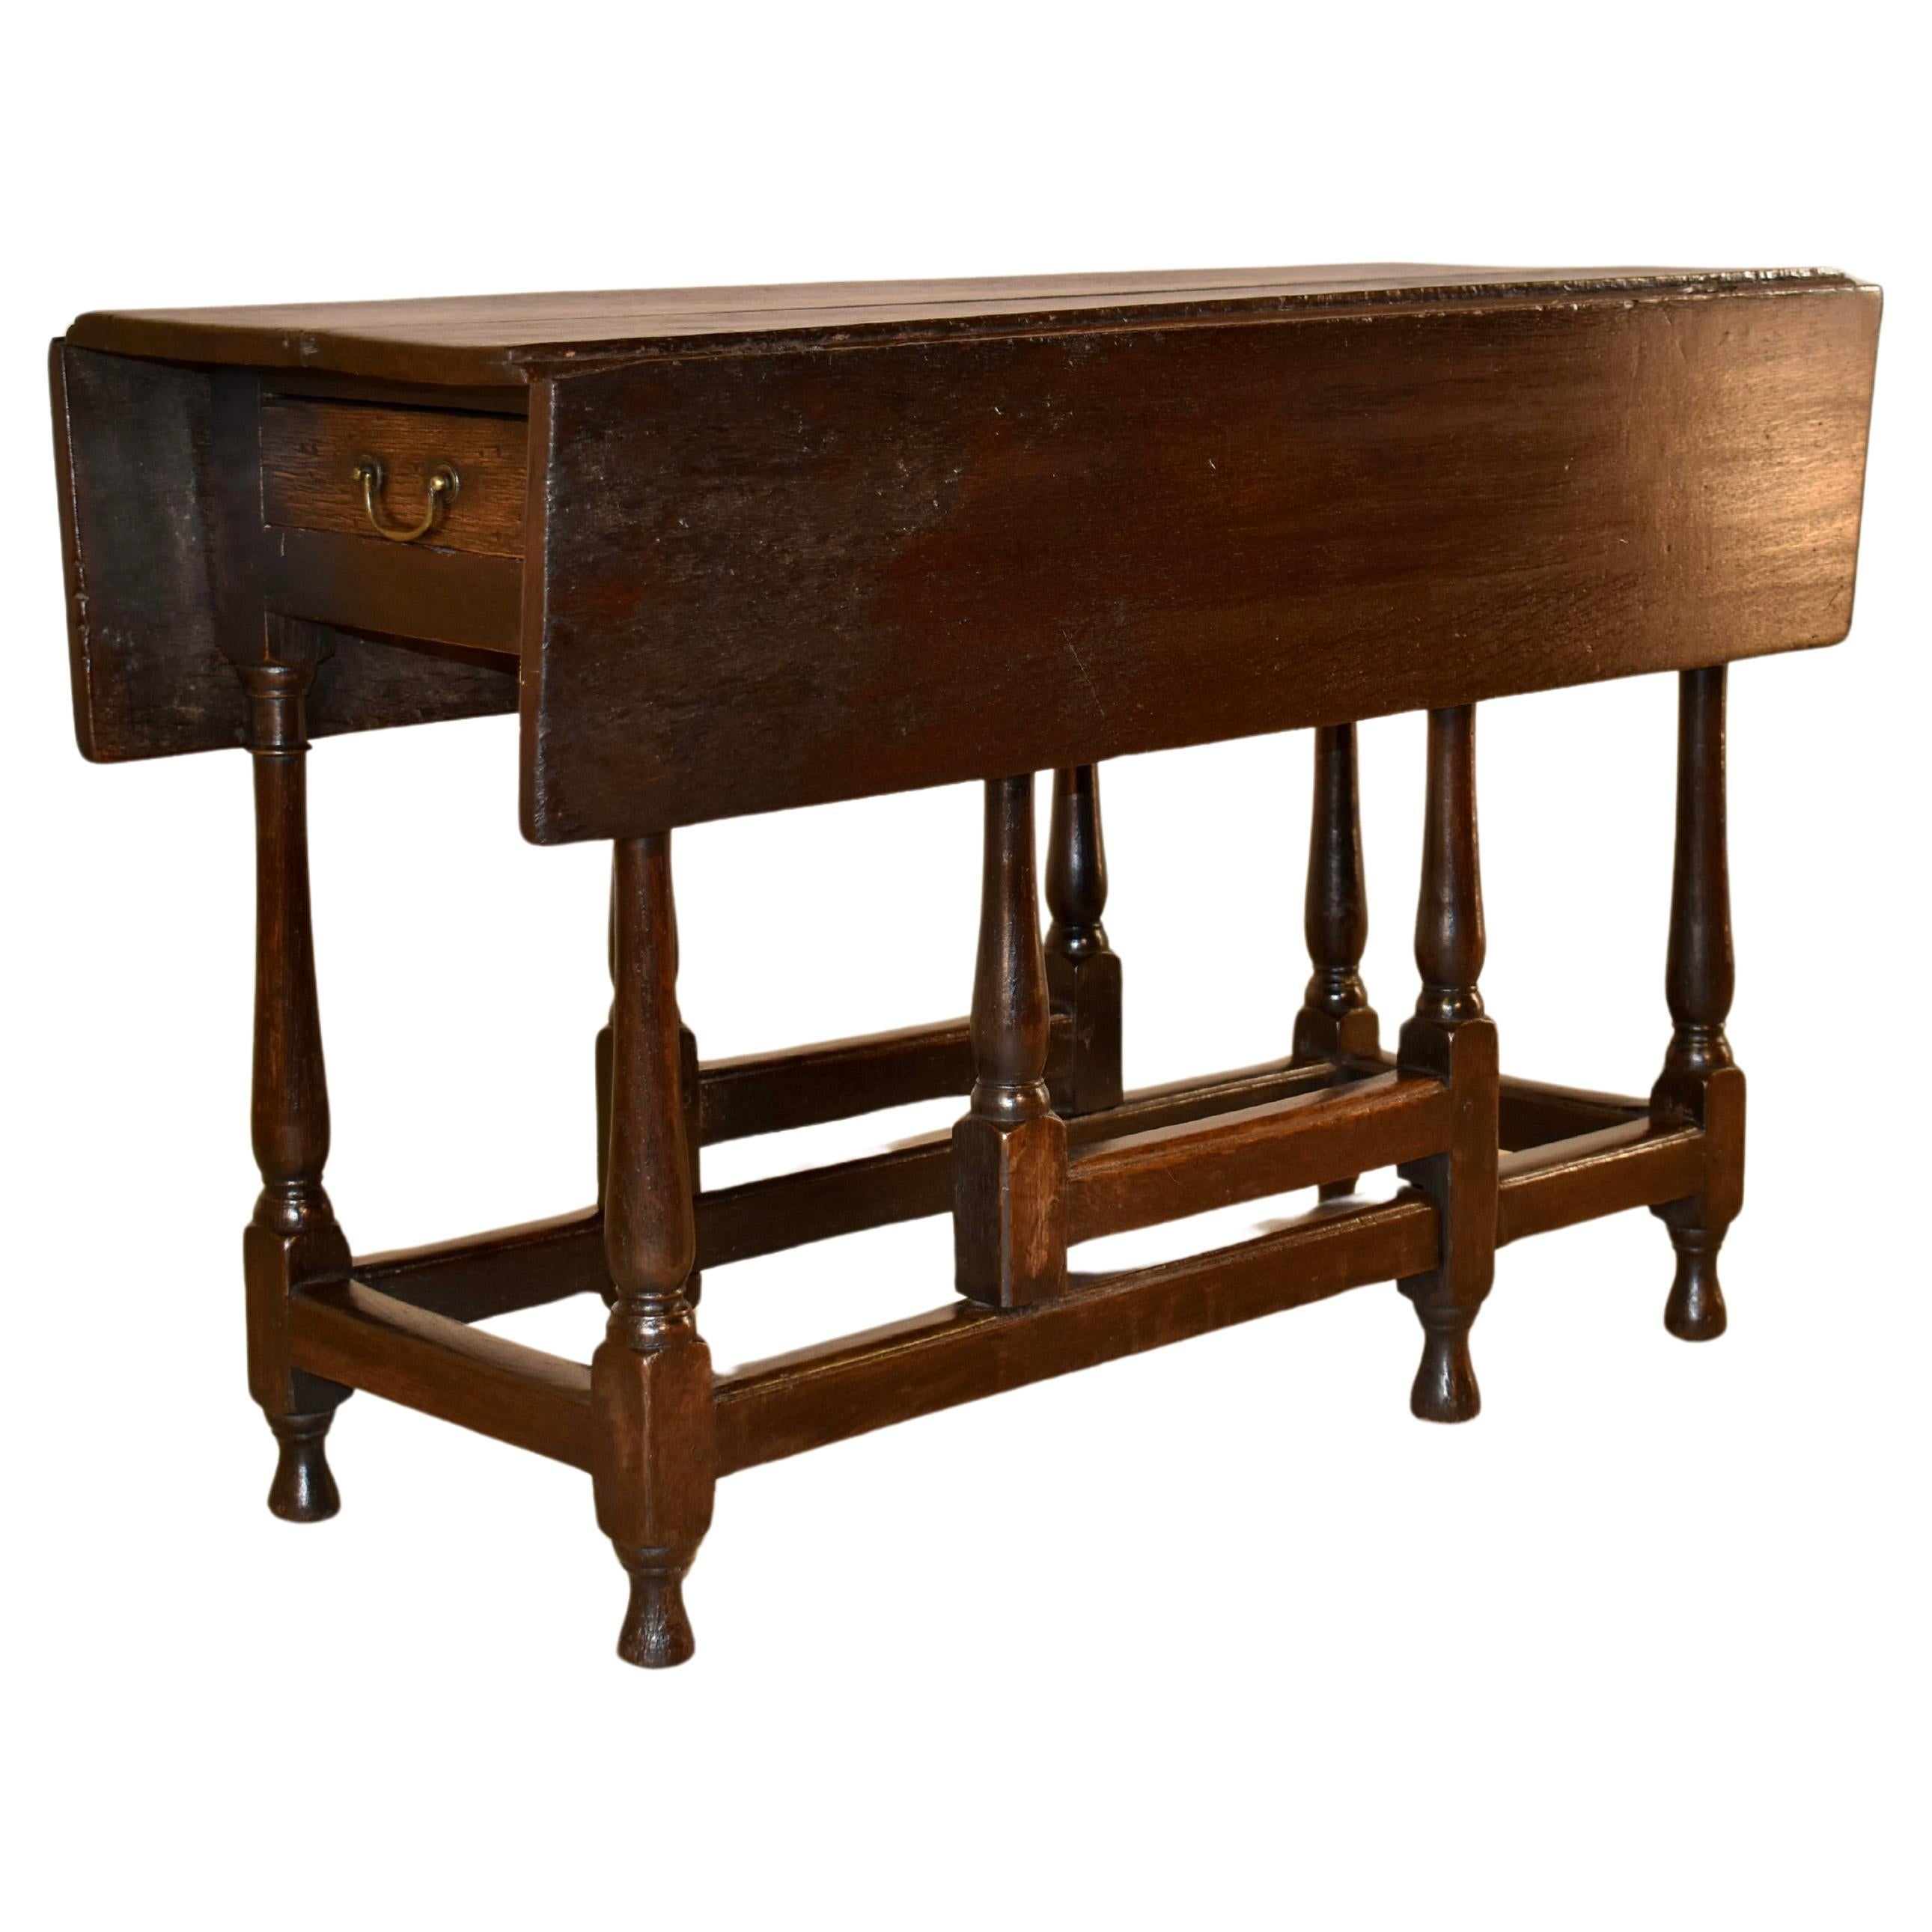 Late 17th - Early 18th Century Drop Leaf Table from England